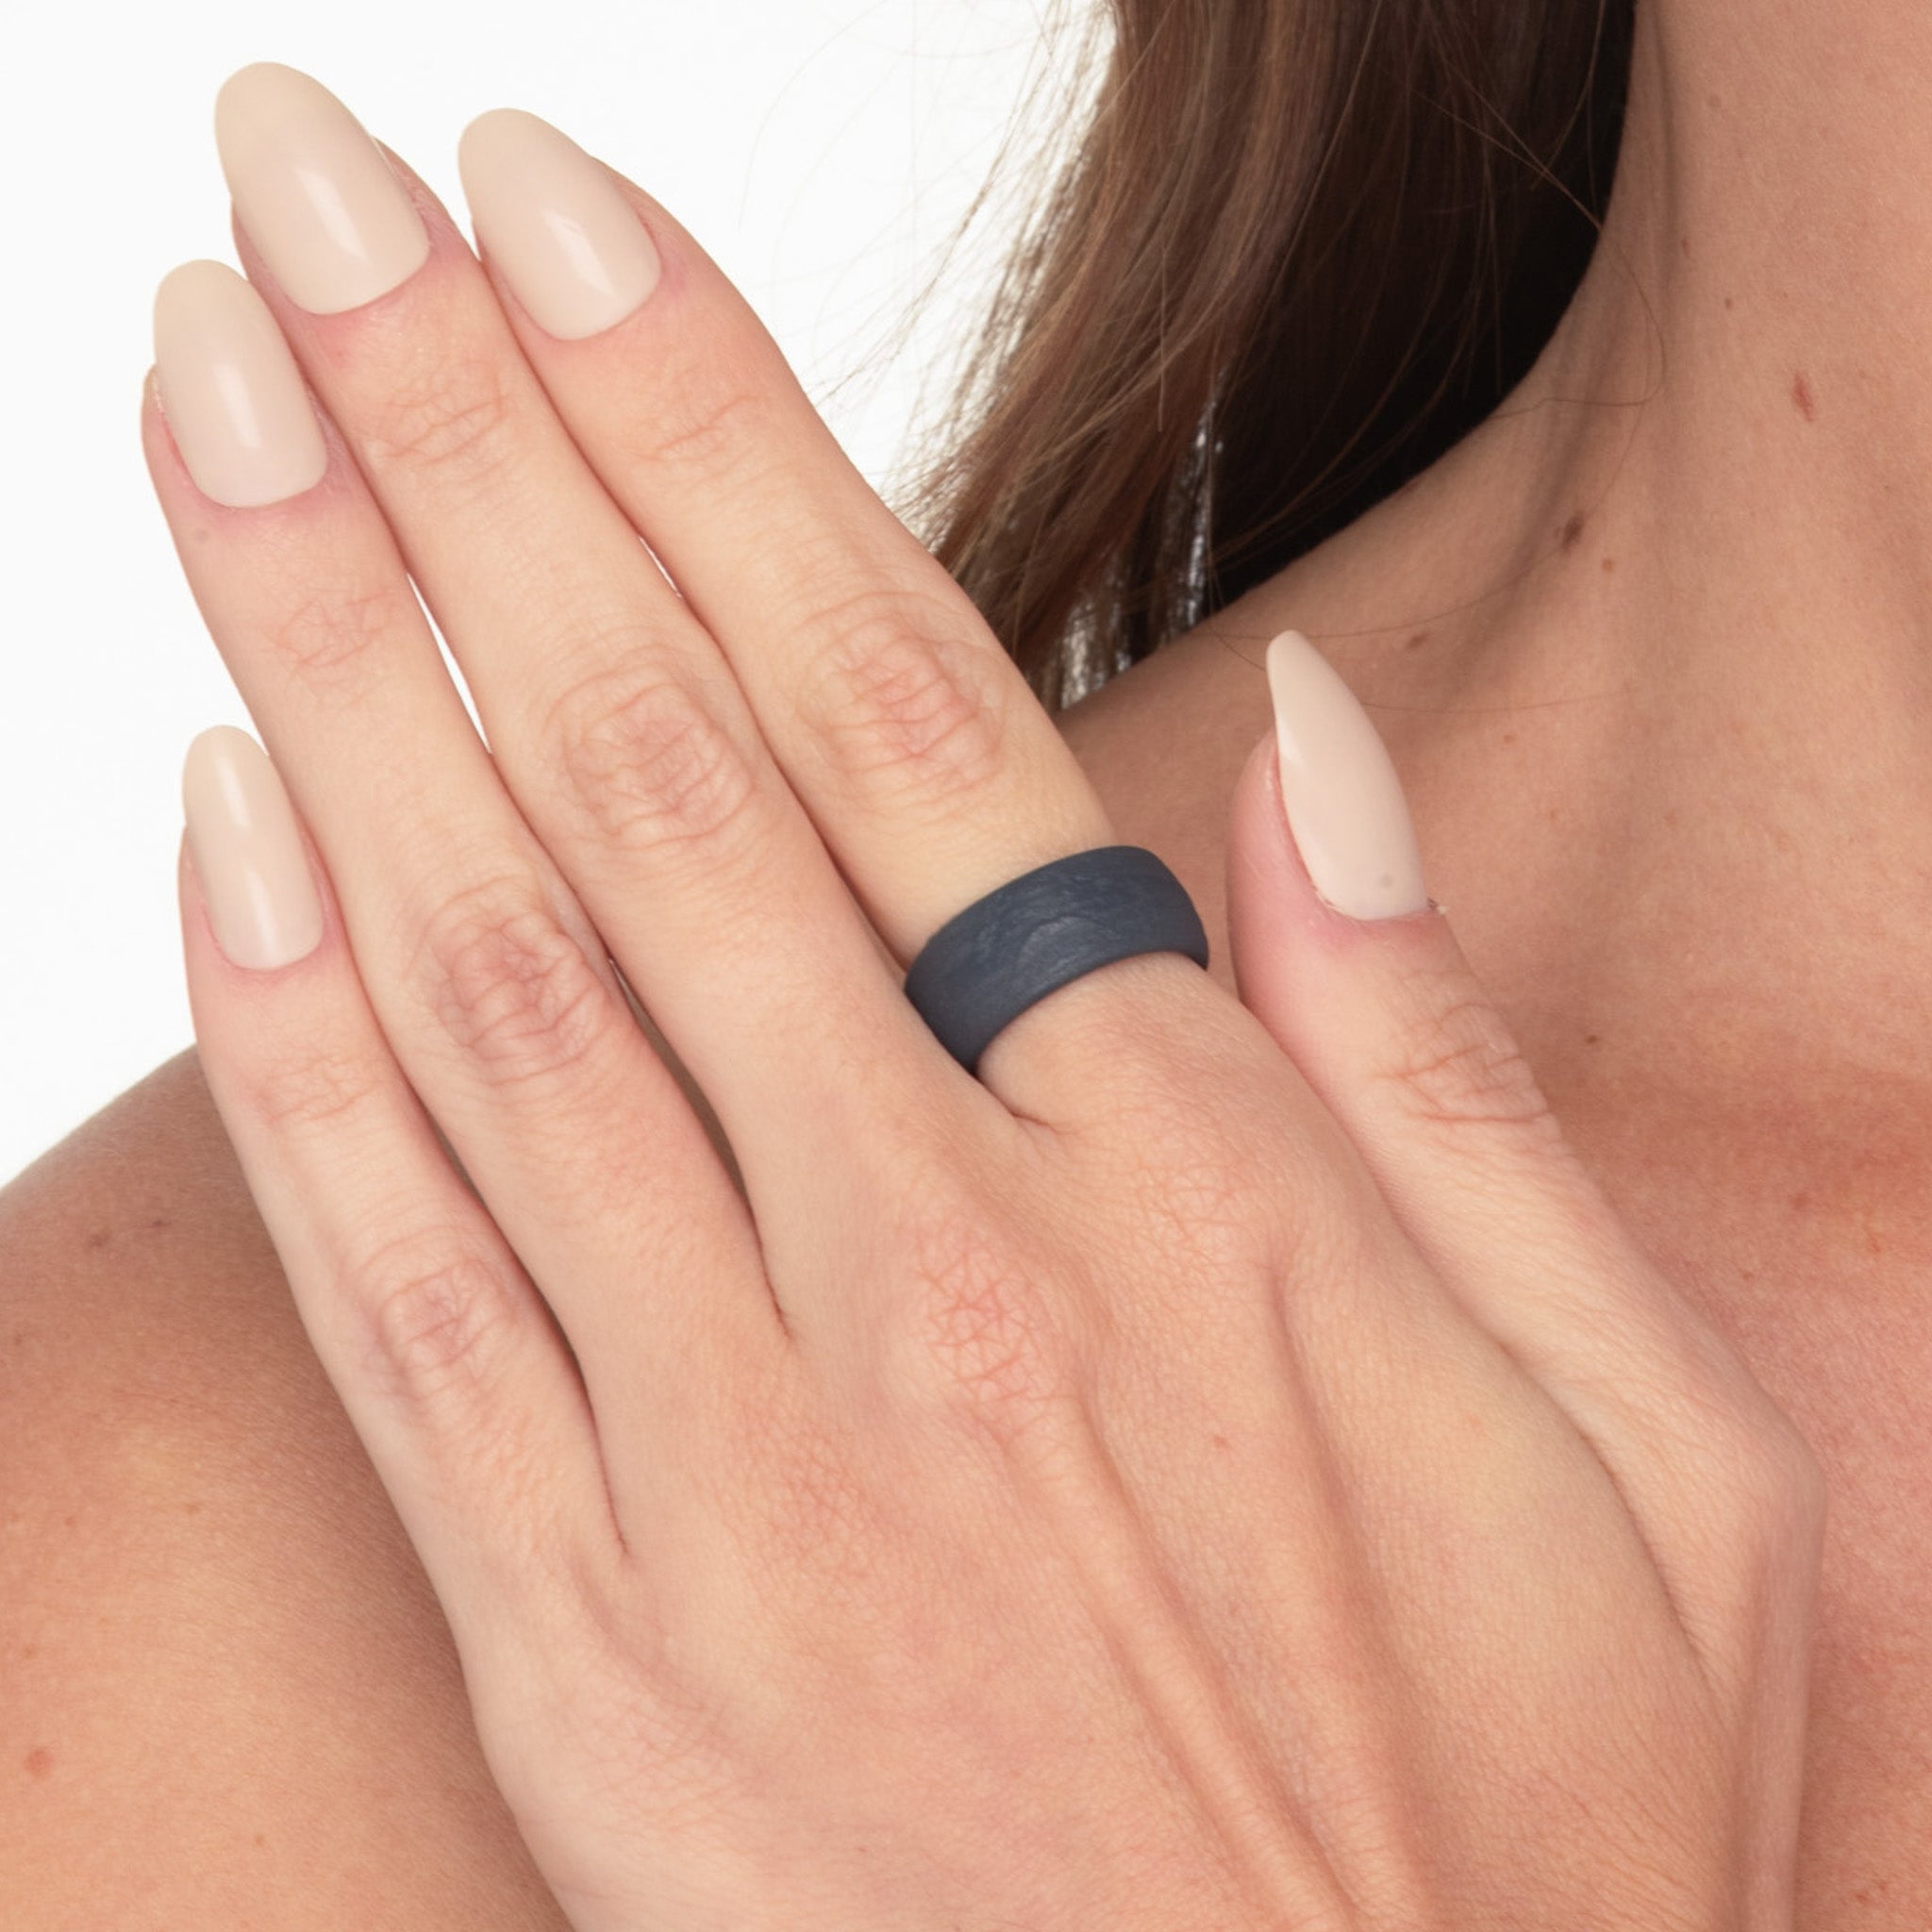 The Charcoal - Silicone Ring